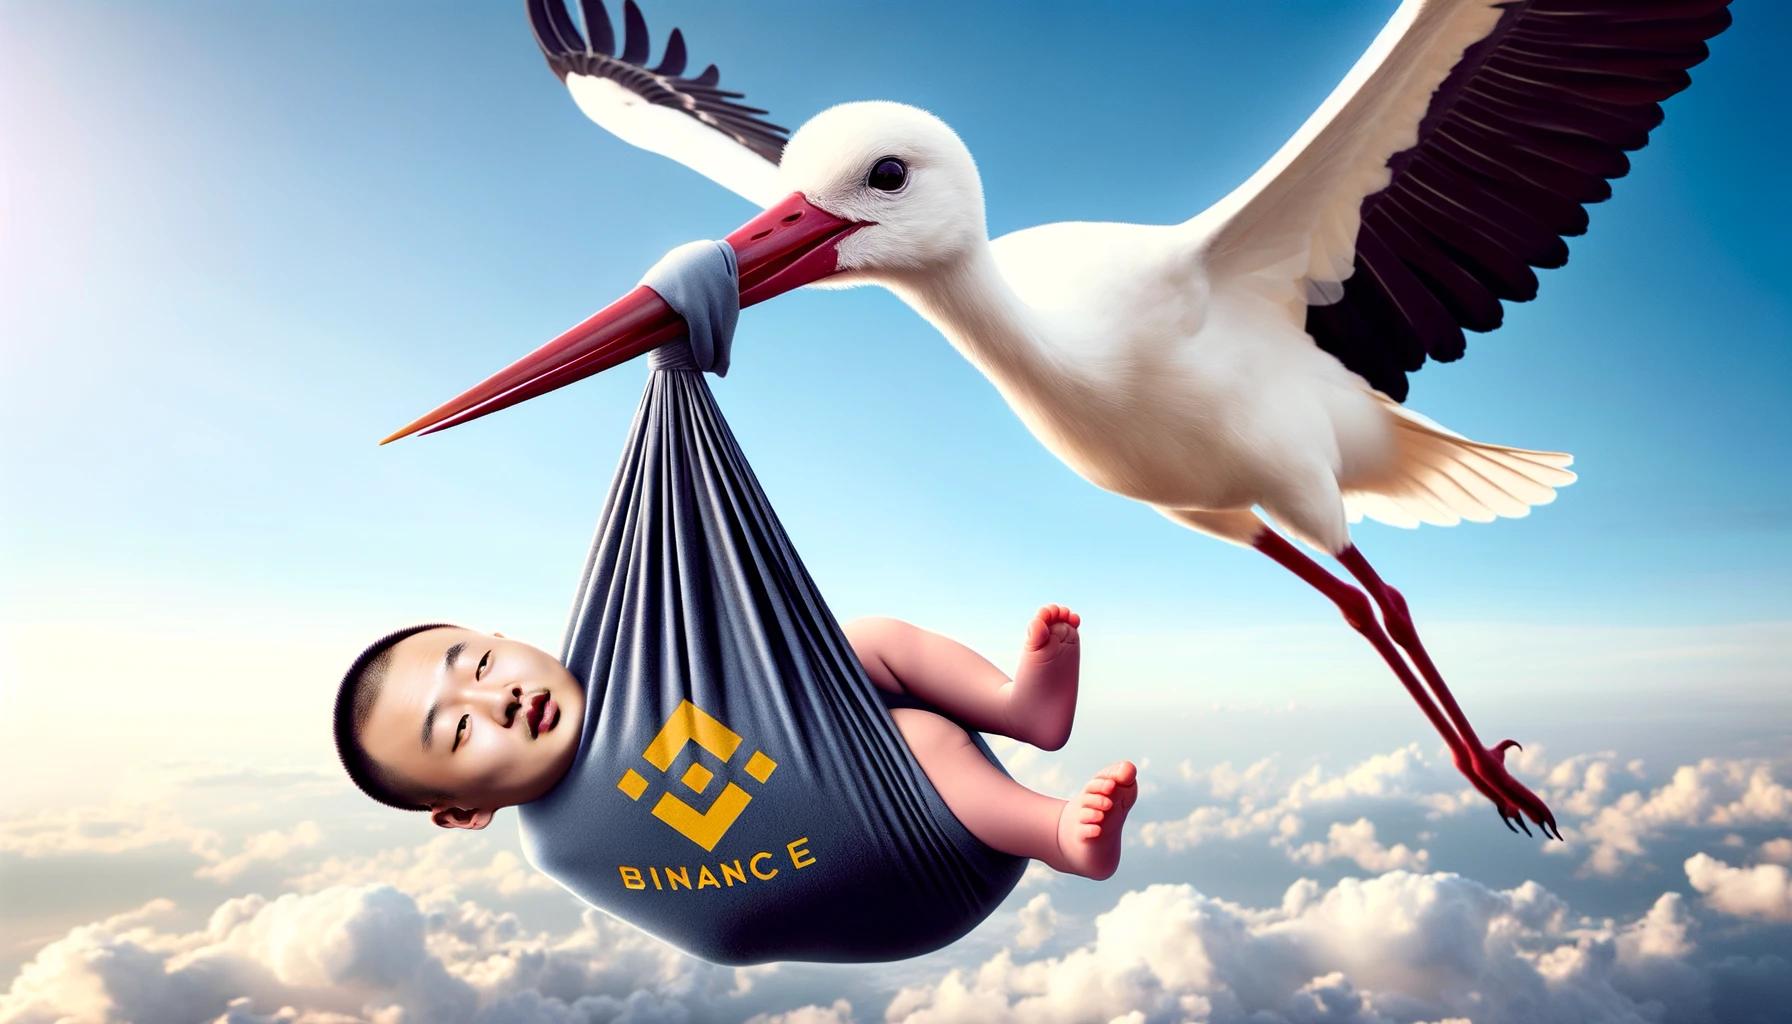 Cover Image for How Crypto Millionaires Are Born (Spoiler: It's Not by Stork)